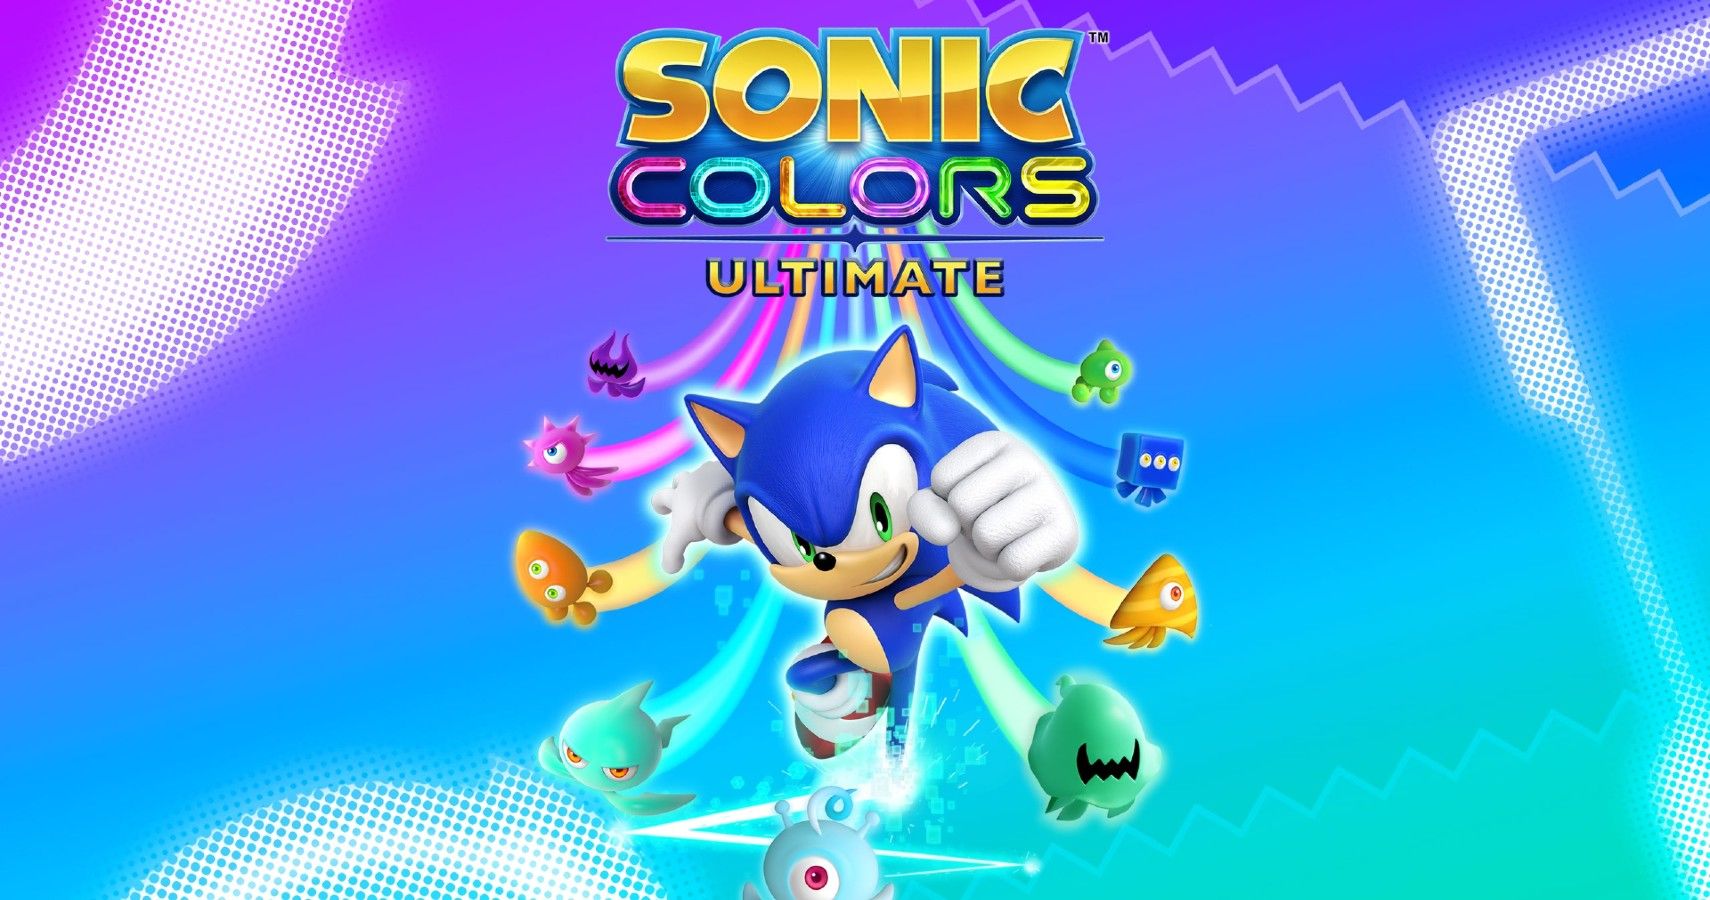 Newest Sonic Colors: Ultimate Shines Light on Colorful Wisps